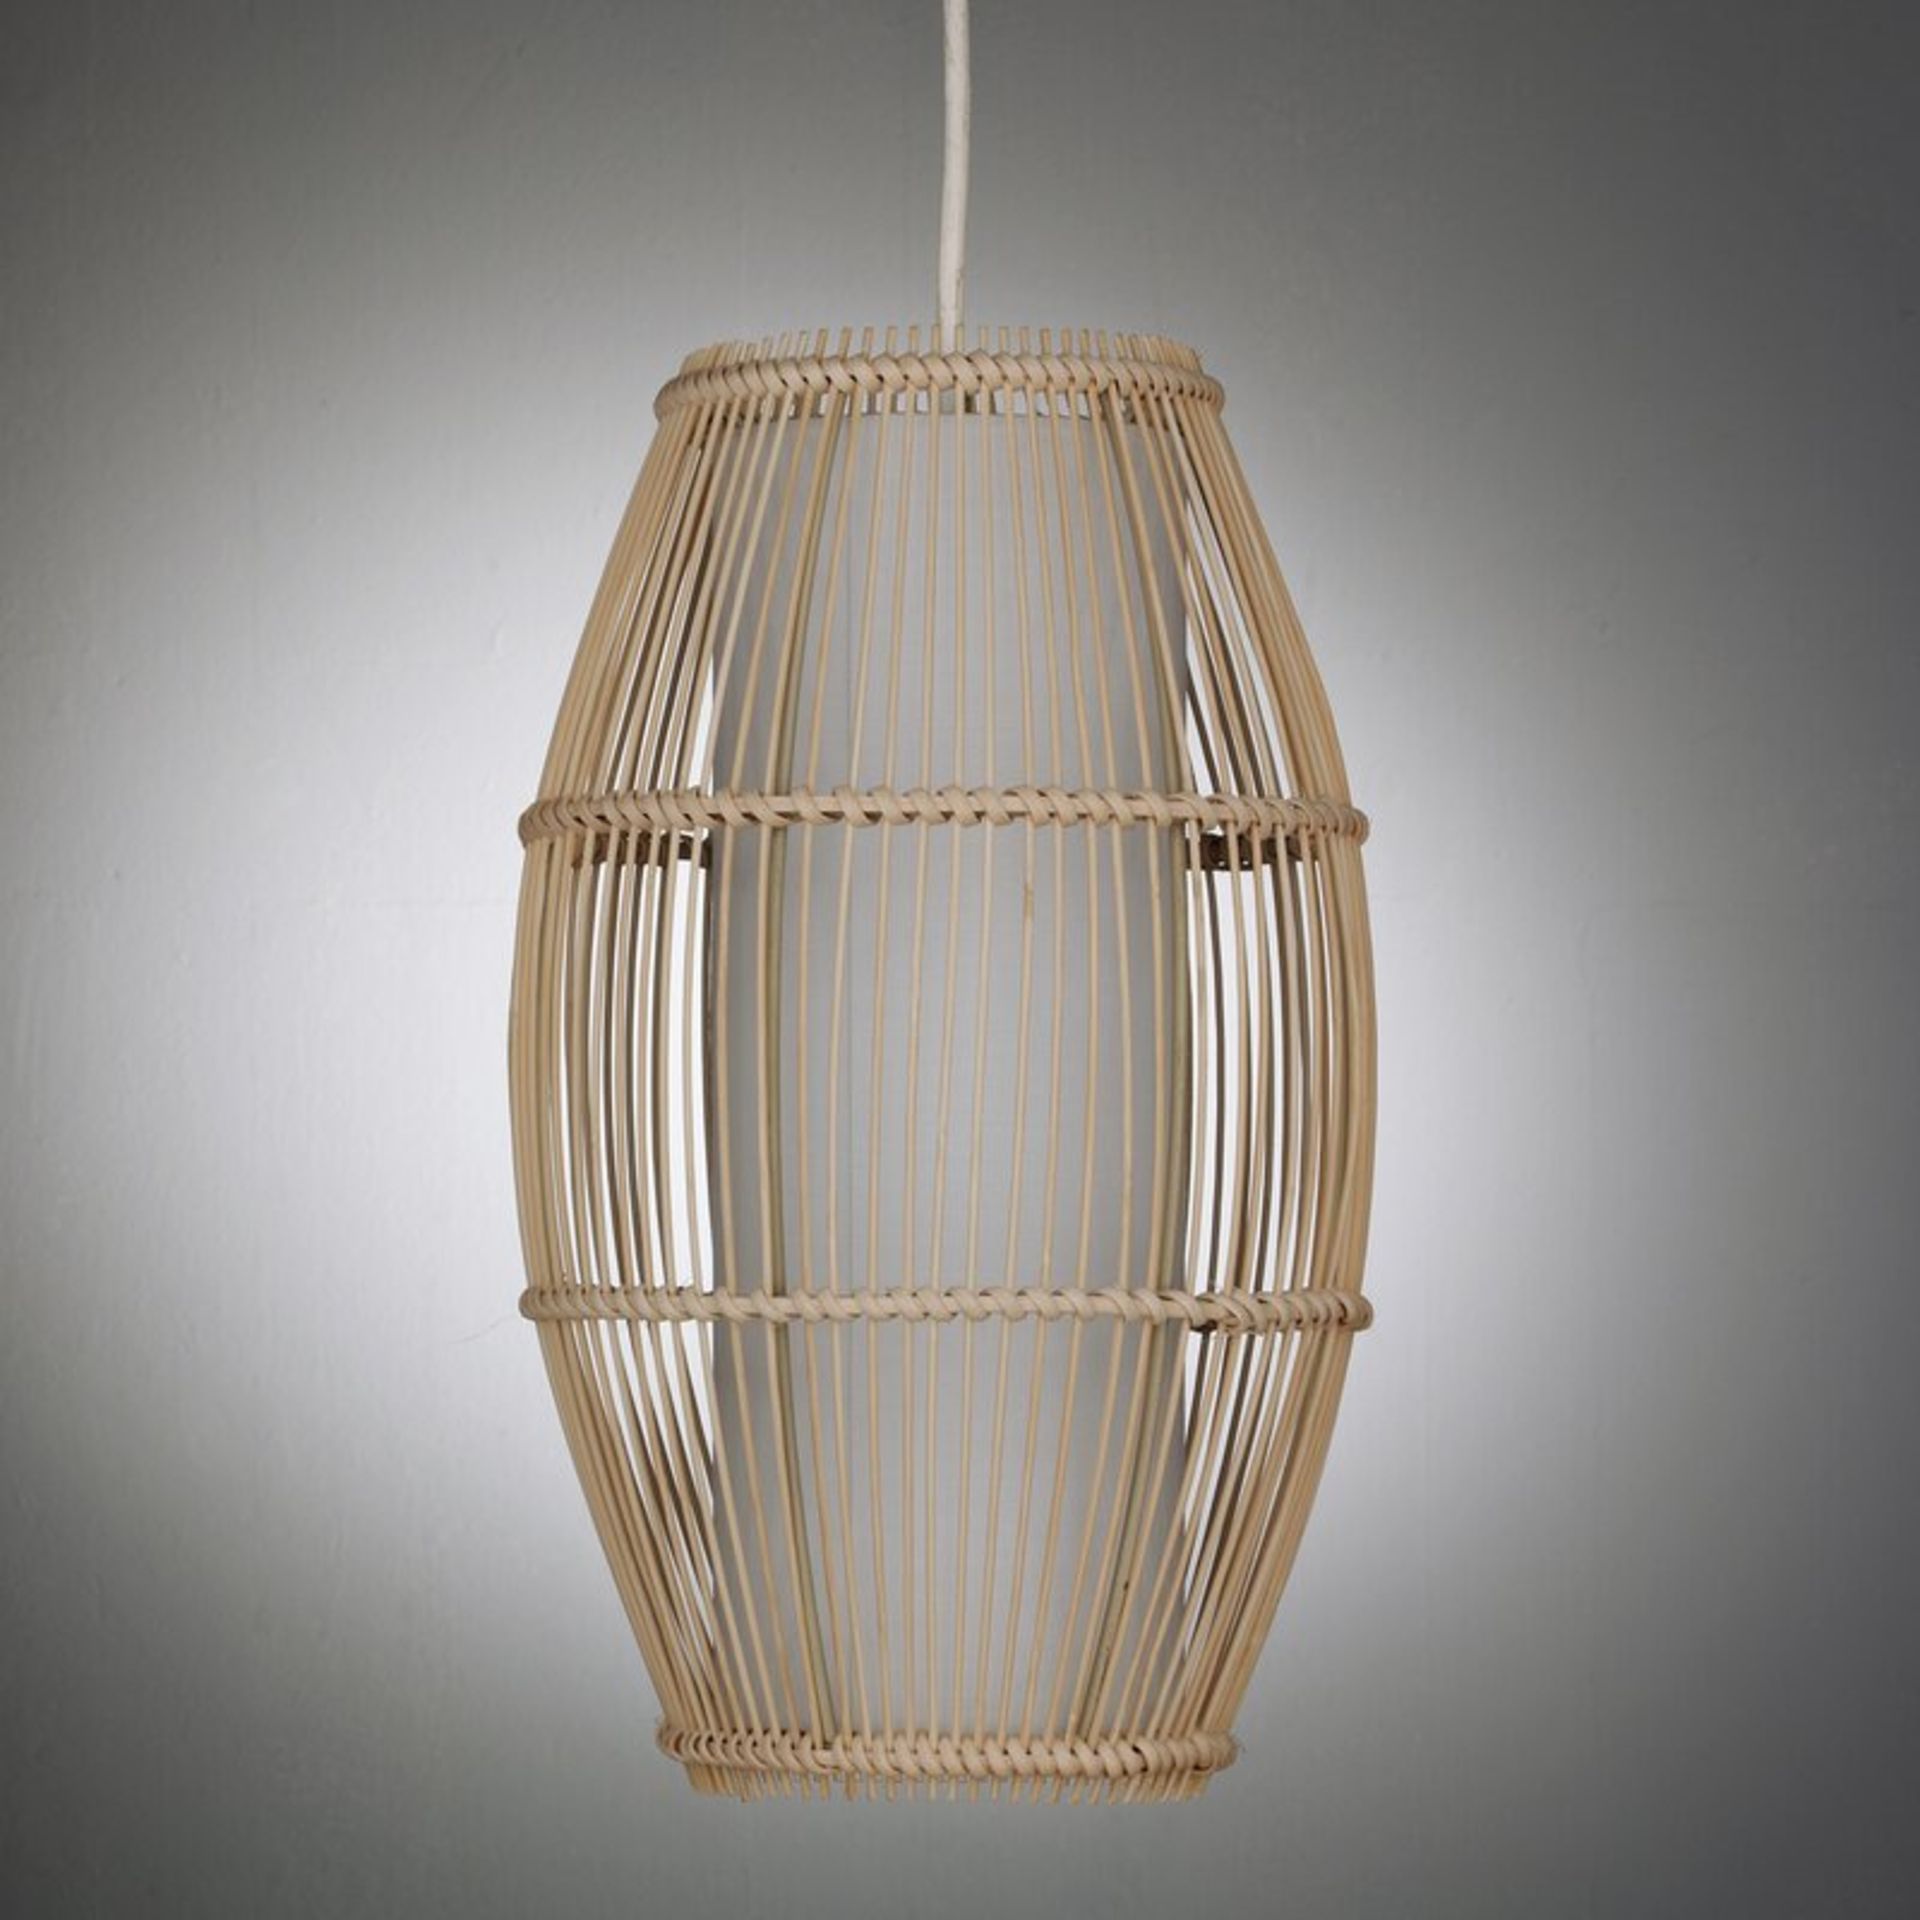 20cm Rattan Oval Pendant Shade - RRP £38.99 - Image 2 of 2